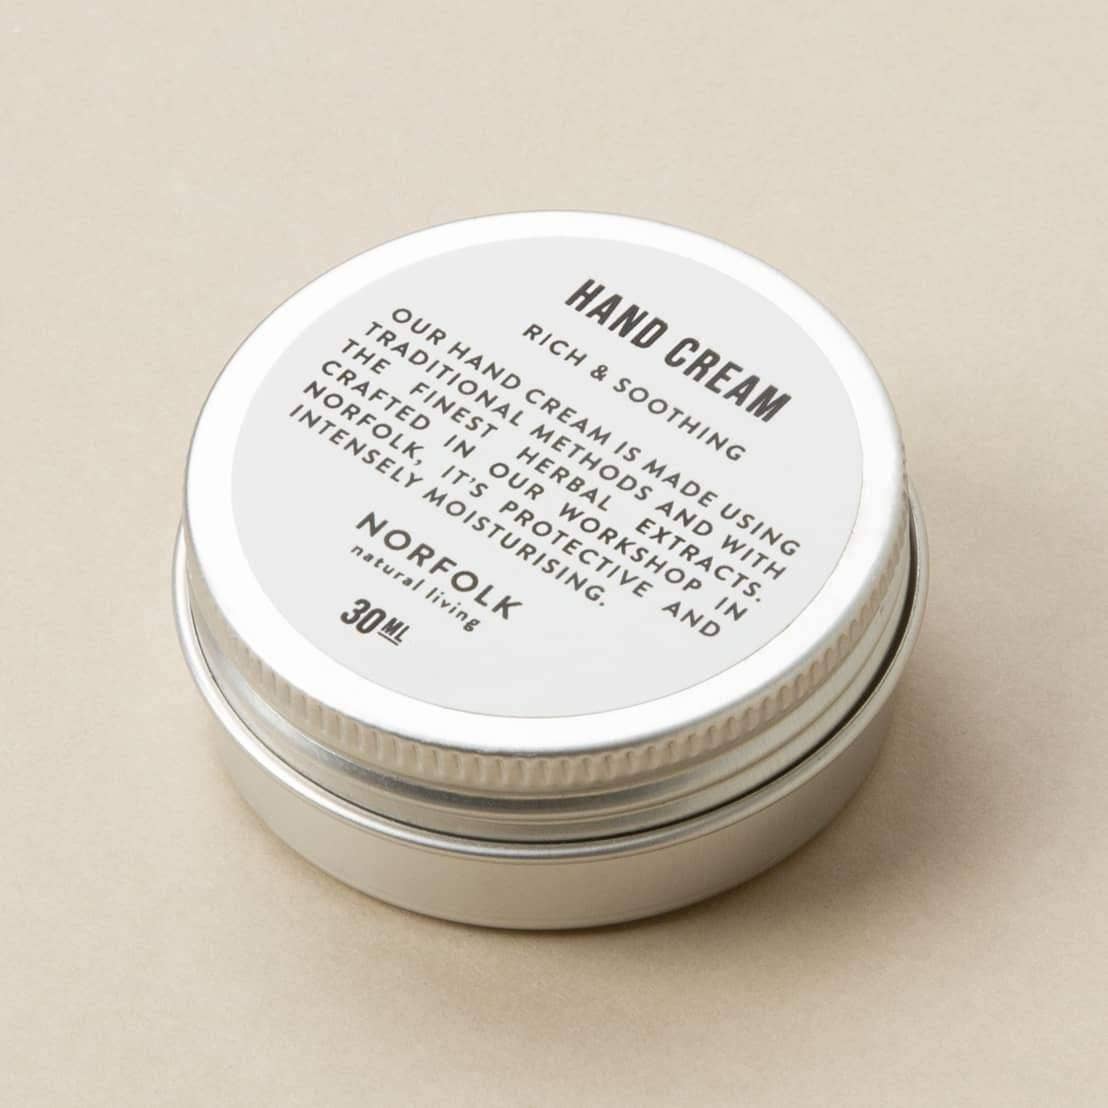 A round, silver container of Norfolk Natural Living Coastal Walk Nourishing Hand Cream labeled "hand cream" on a beige background, emphasizing its rich and soothing qualities, made in Norfolk.